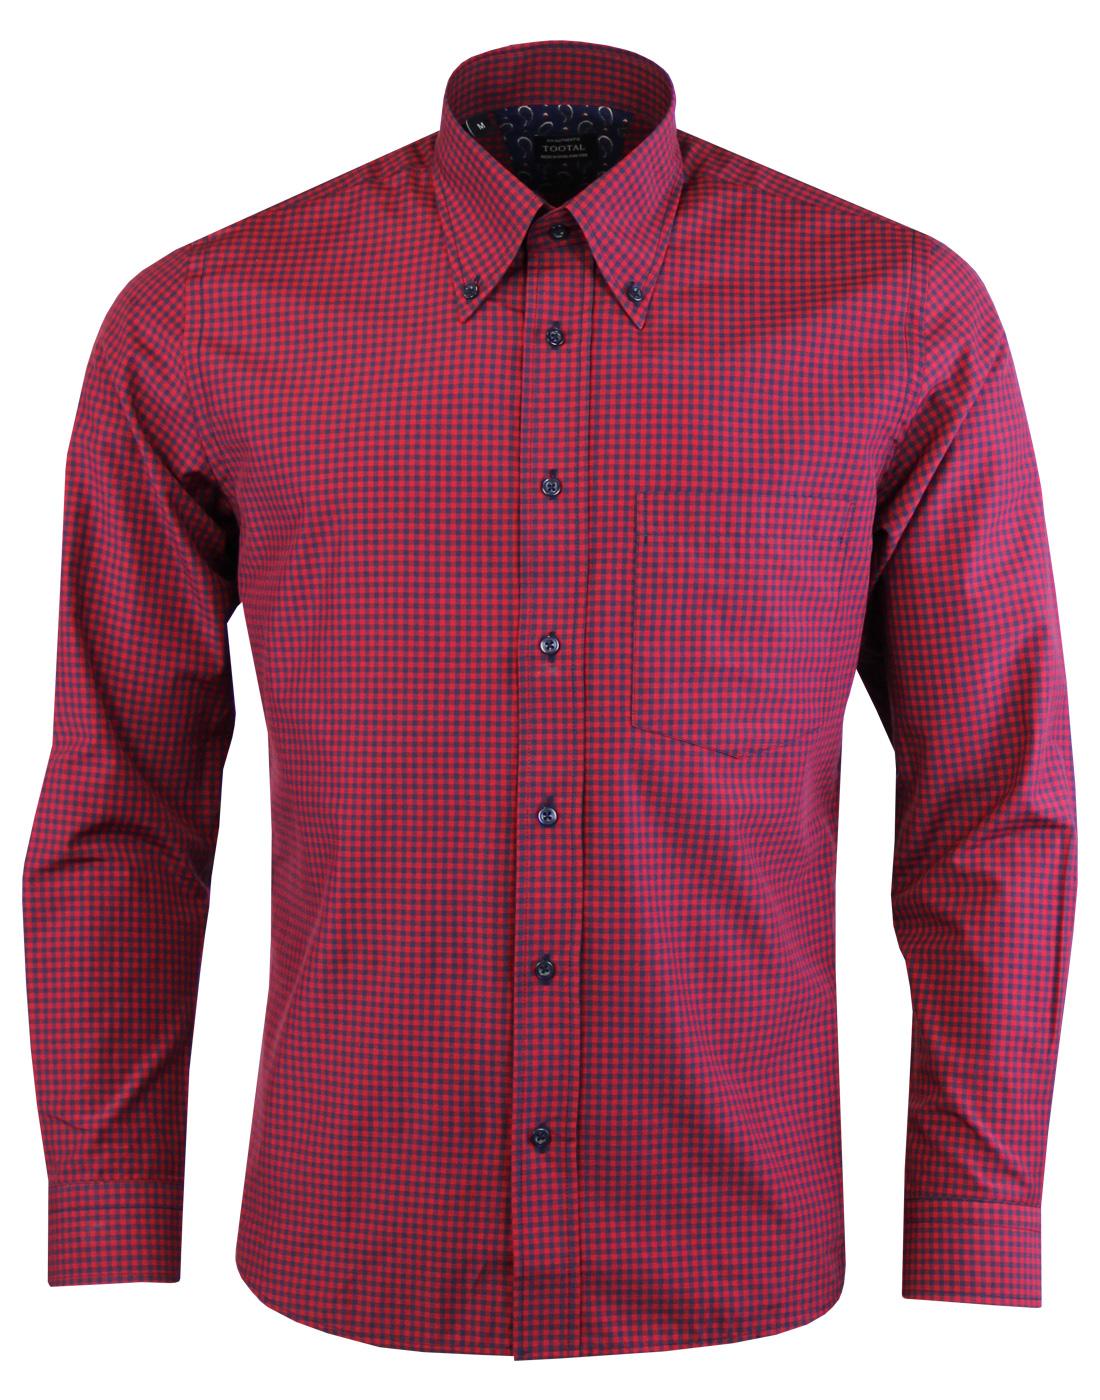 Tootal Two Tone Gingham Shirt with Button Down Collar in Red 